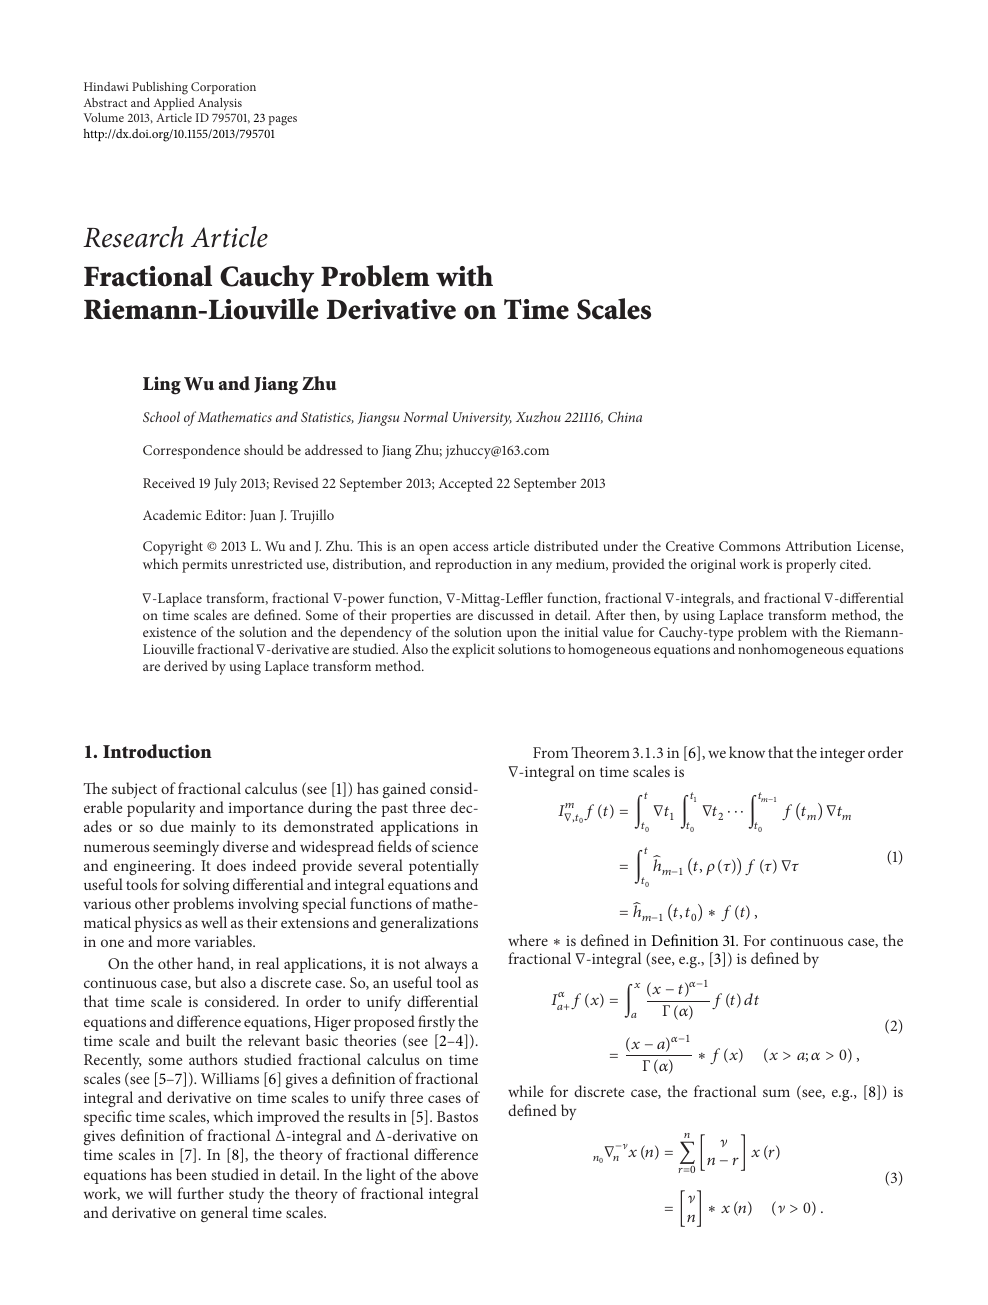 Fractional Cauchy Problem With Riemann Liouville Derivative On Time Scales Topic Of Research Paper In Mathematics Download Scholarly Article Pdf And Read For Free On Cyberleninka Open Science Hub